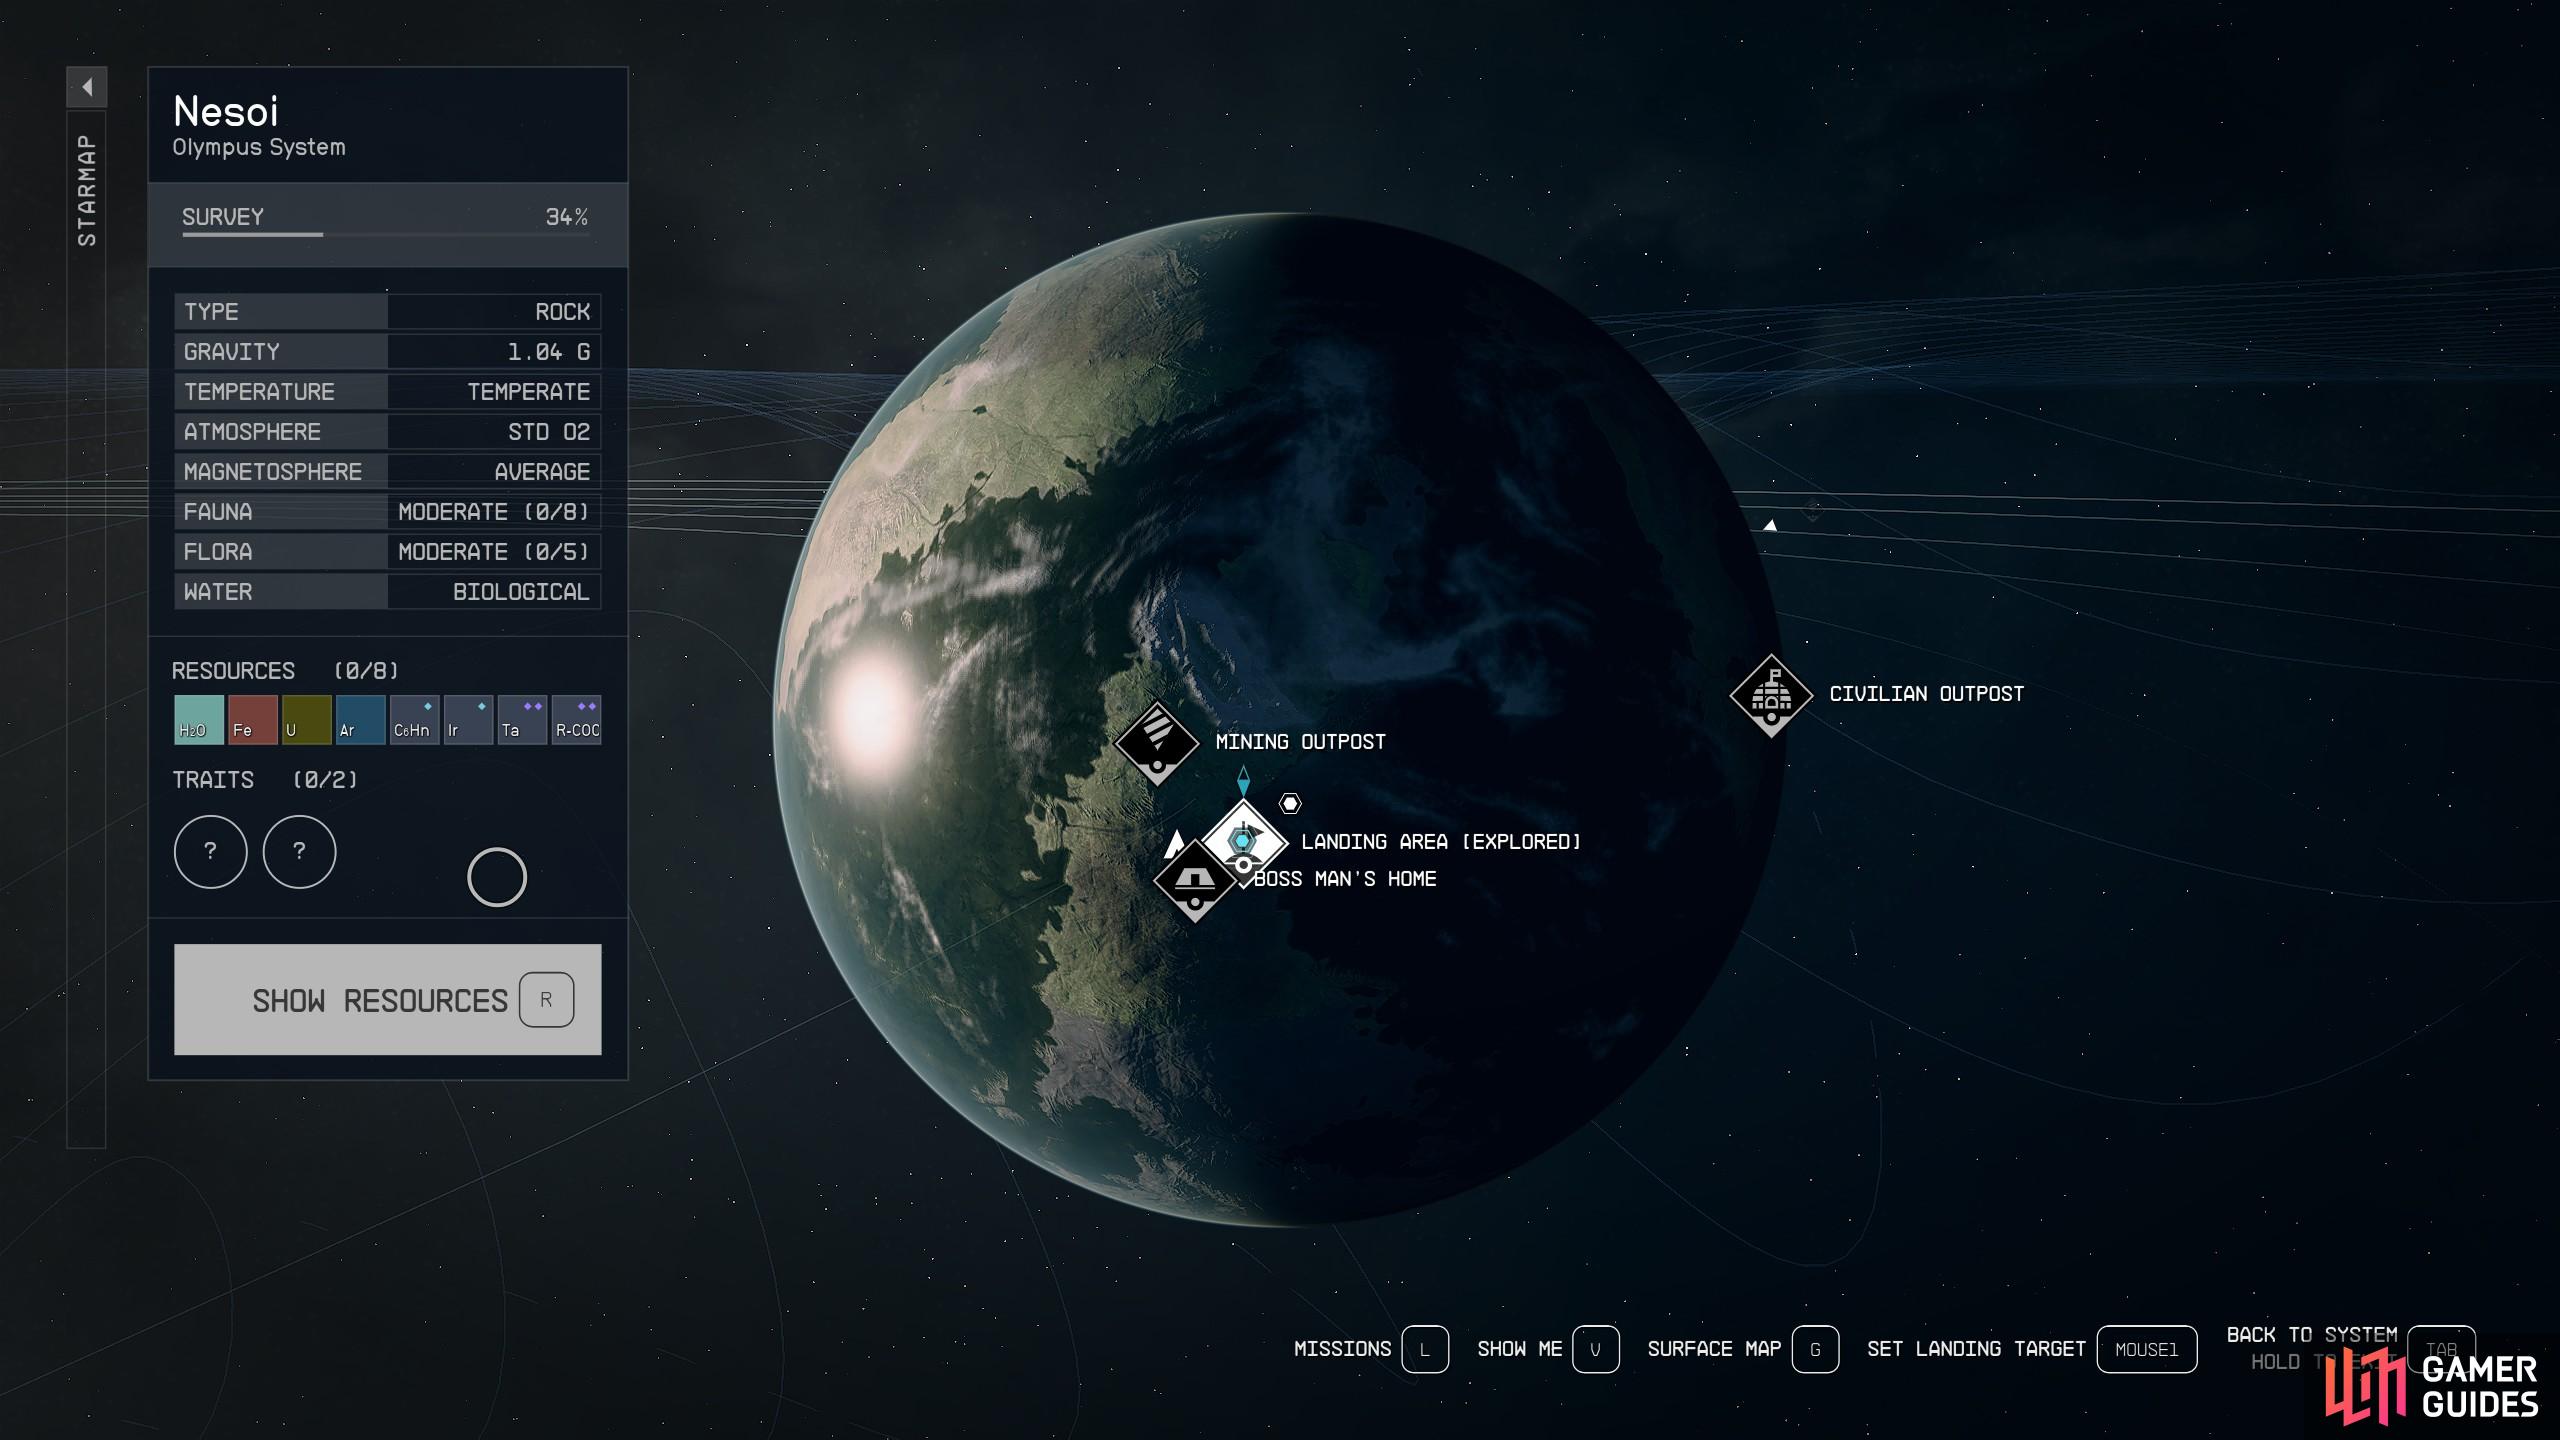 Every planet has traits that you can unlock with some science or exploration.